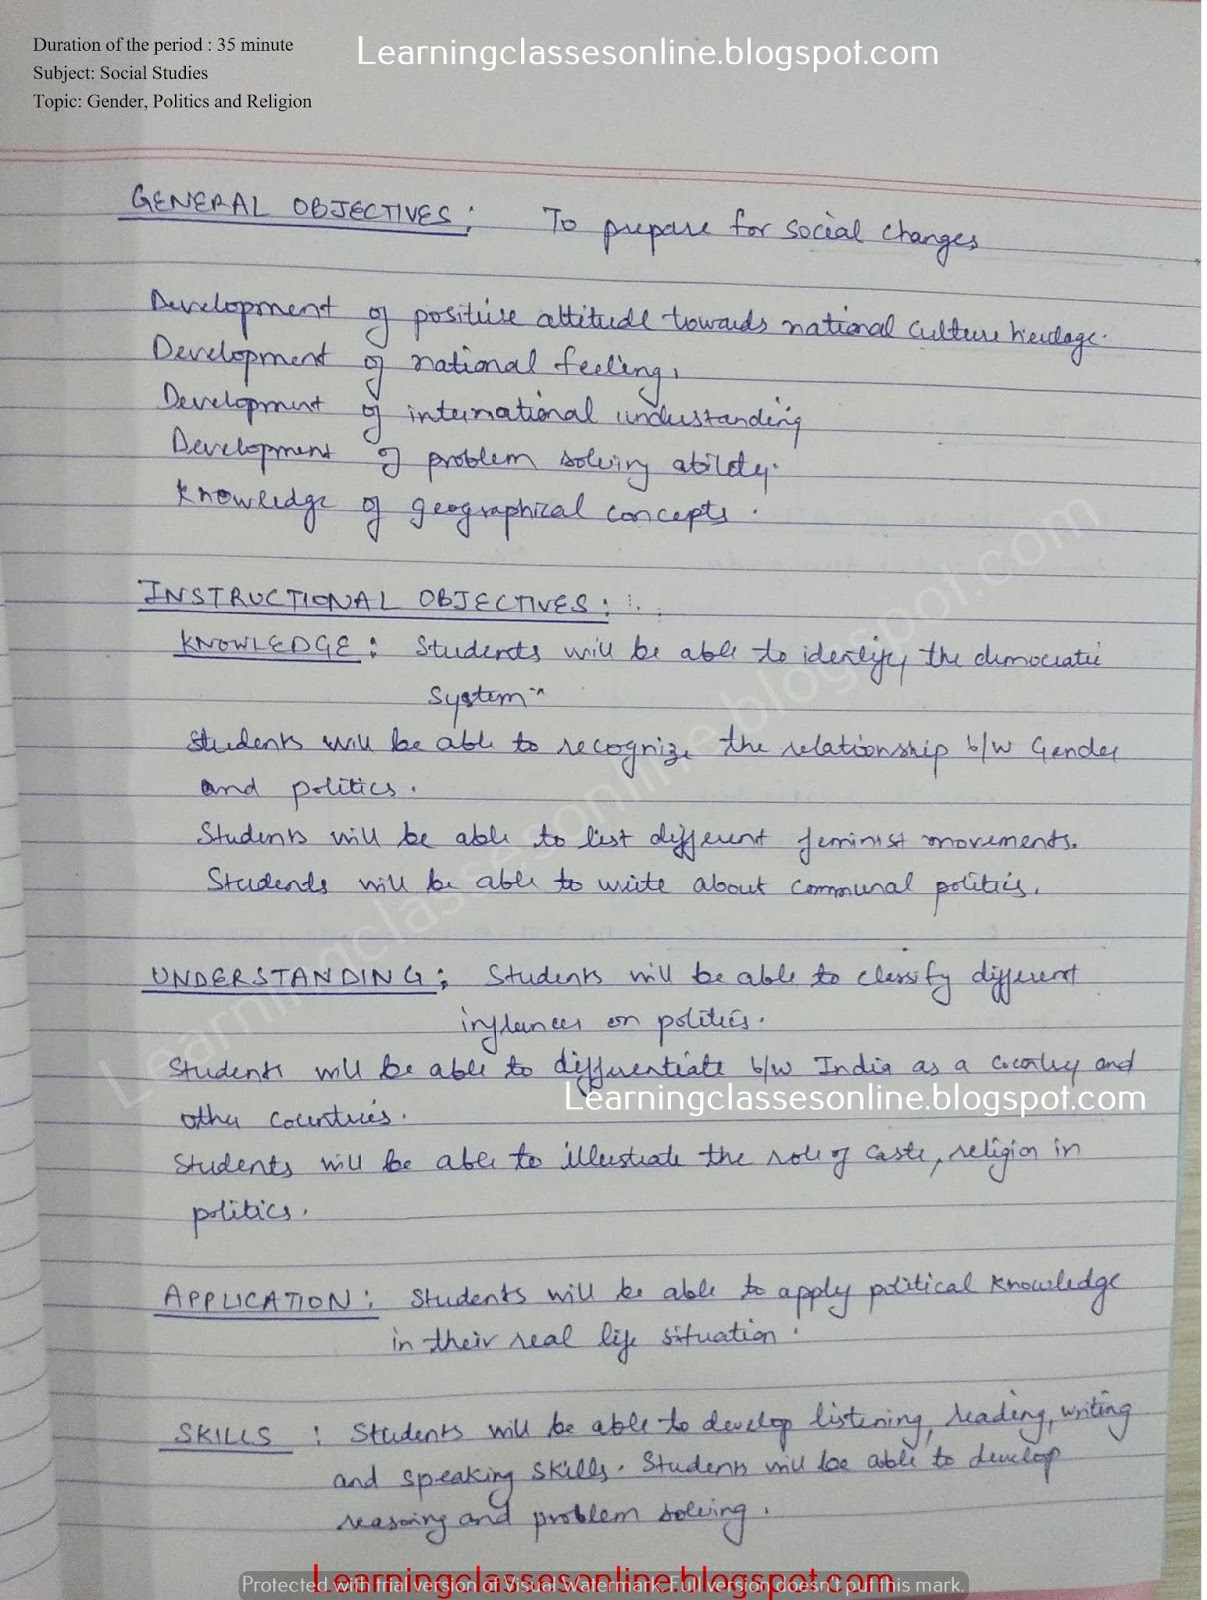 lesson plan of social studies for class 6 th on gender politics and religion